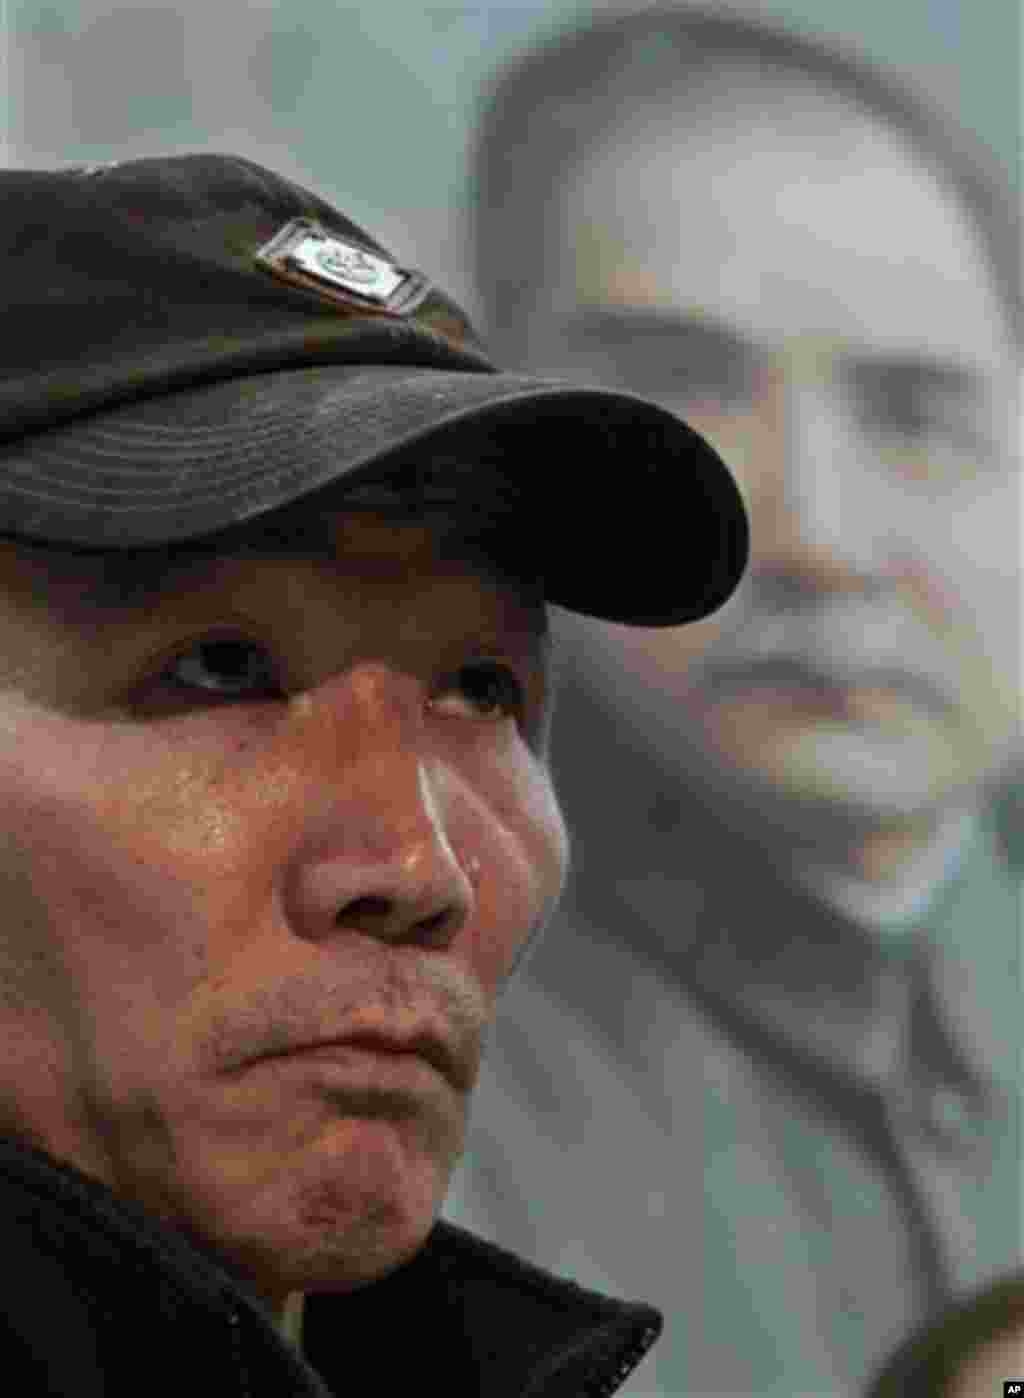 Yan Tao Chen, the father of Pvt. Danny Chen, listens during a news conference on Thursday, Jan. 5, 2012 in New York. (AP Photo)